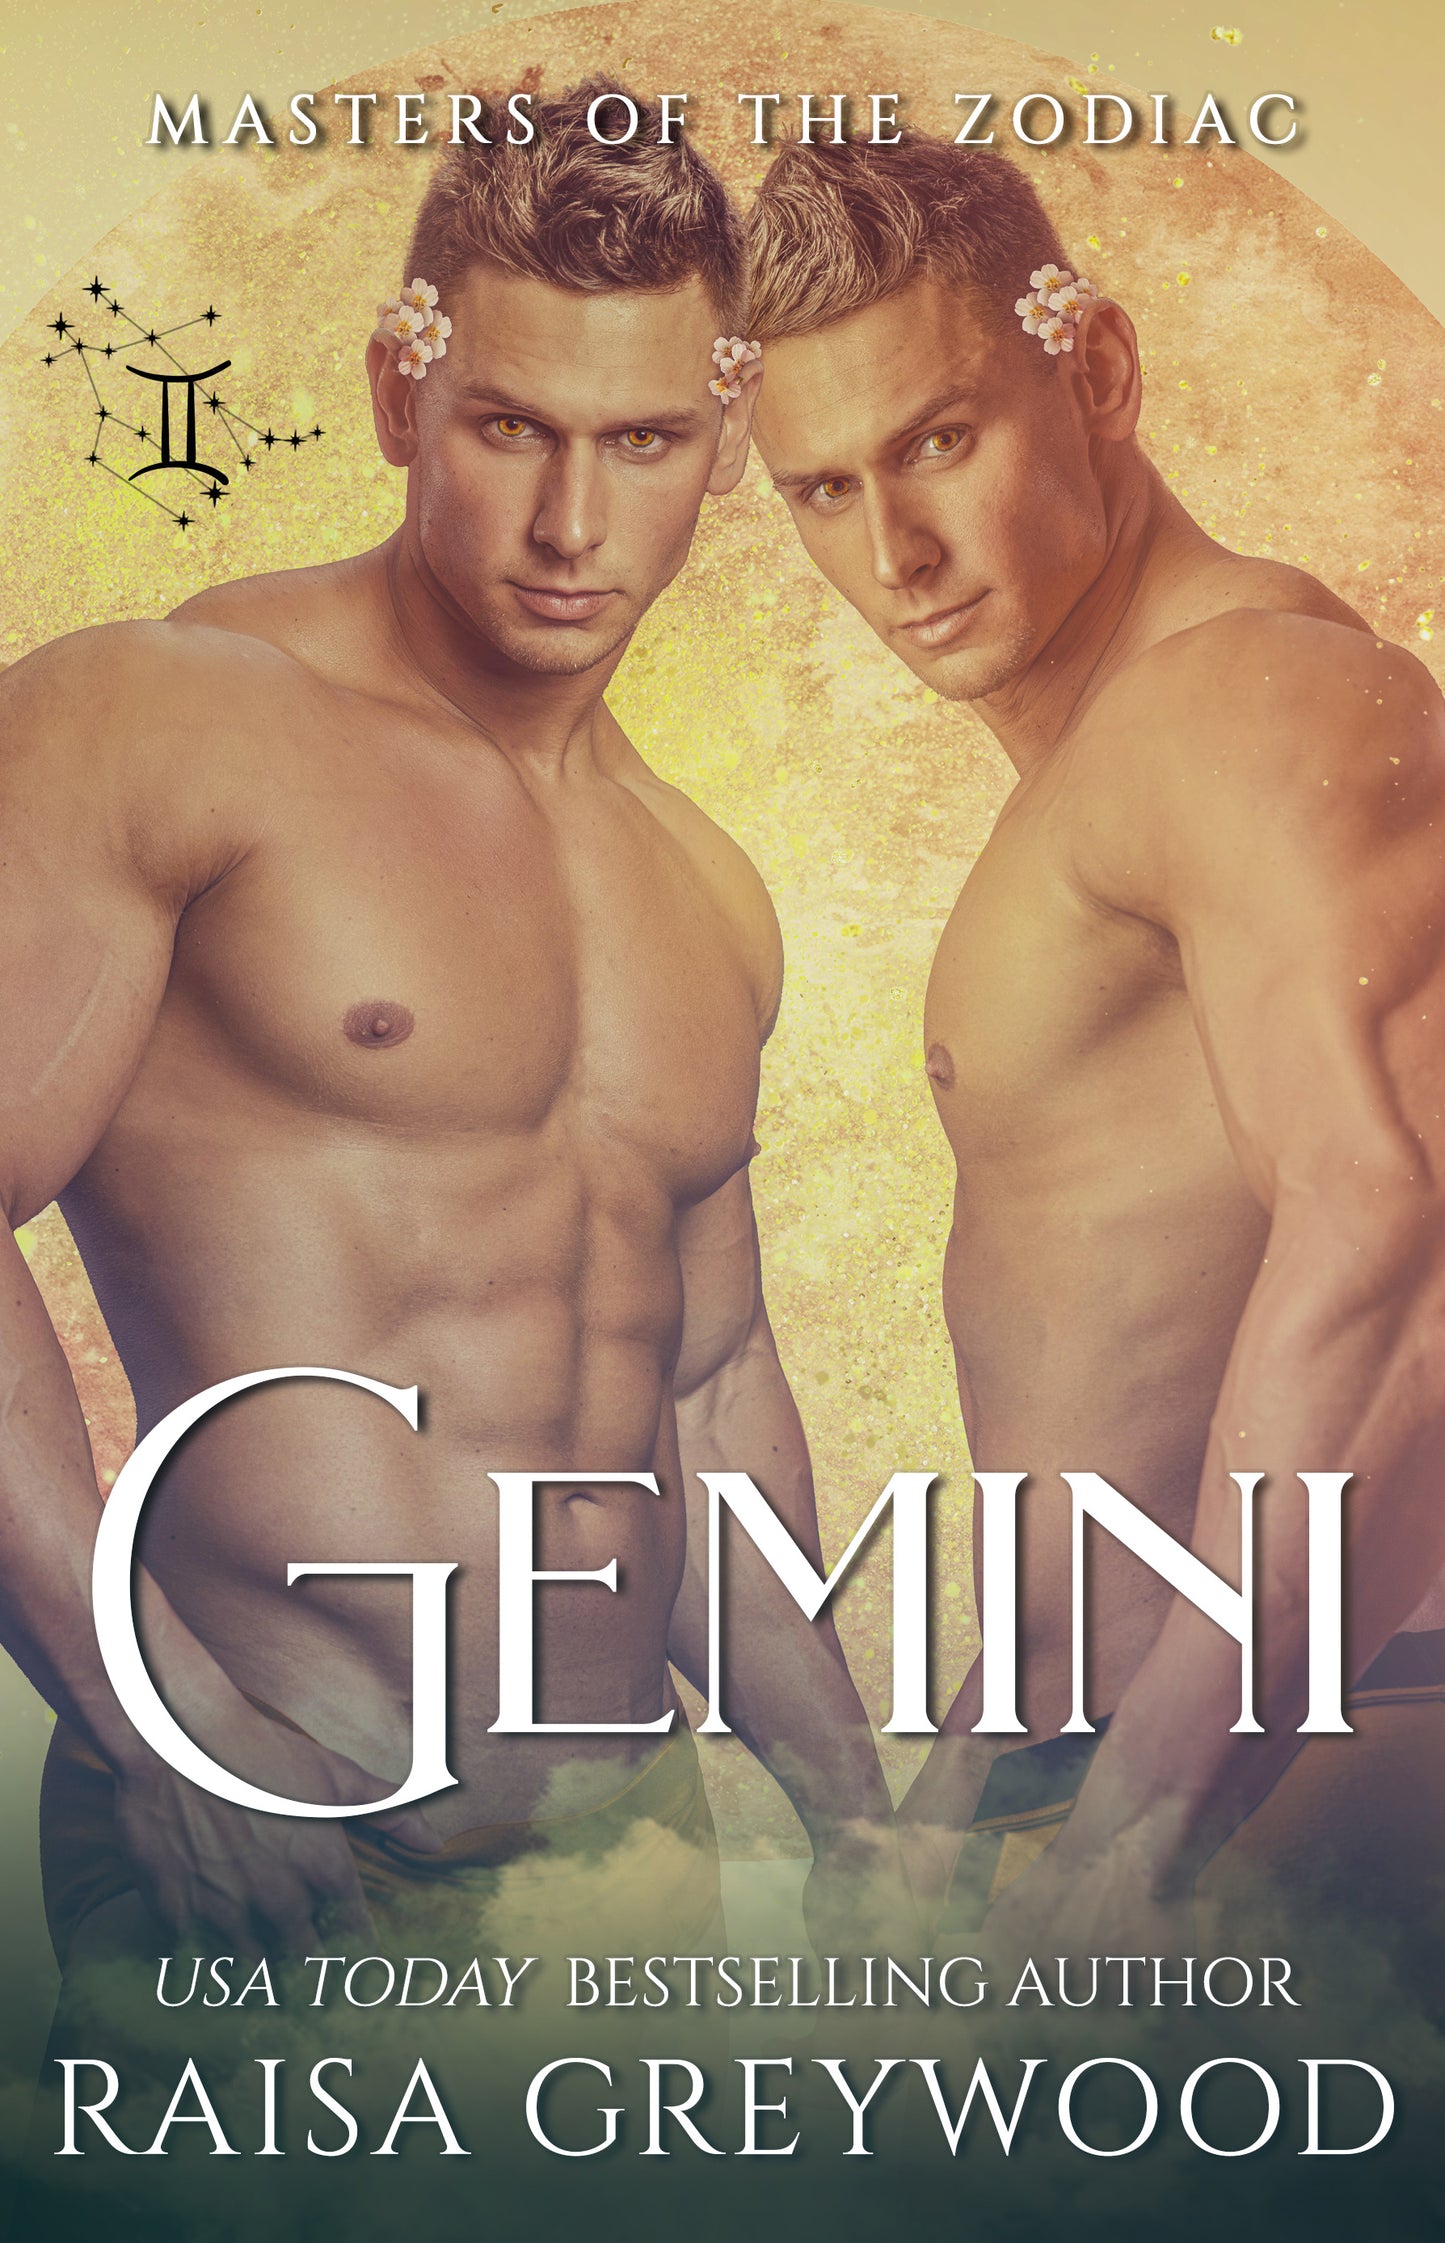 Masters of the Zodiac: Gemini Signed Paperback